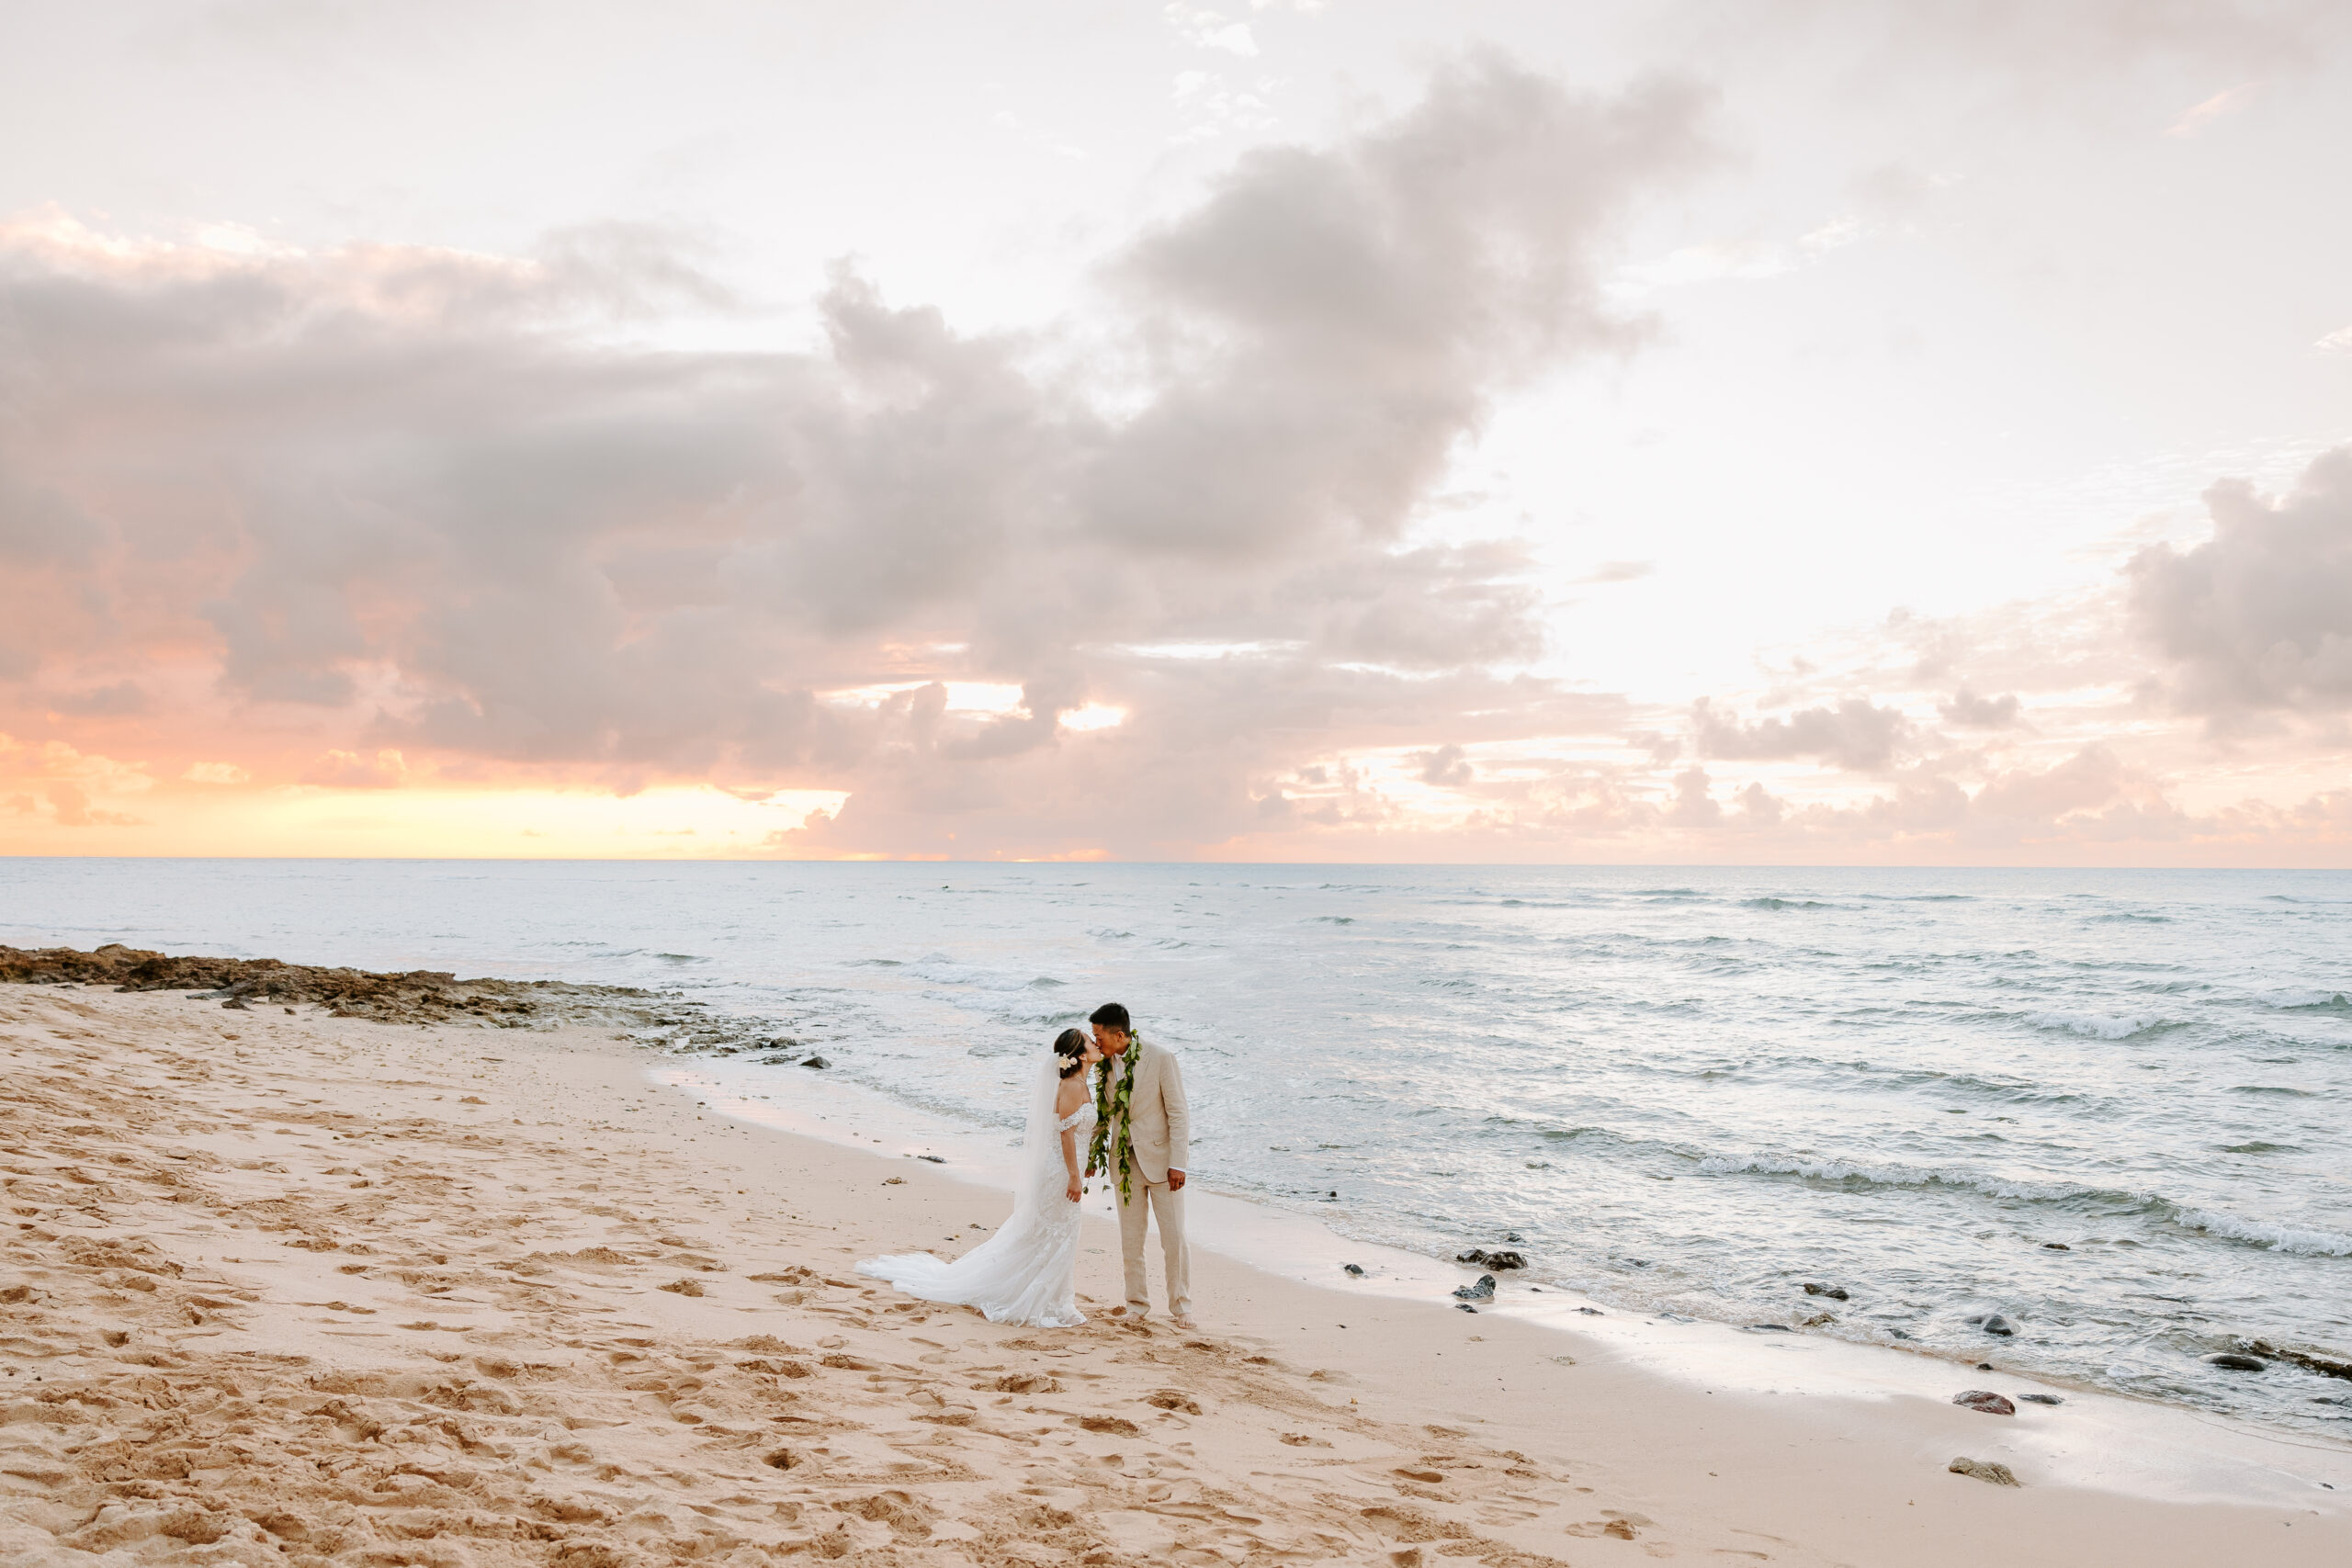 A newly married couple kissing on the beach at sunset on Oahu.